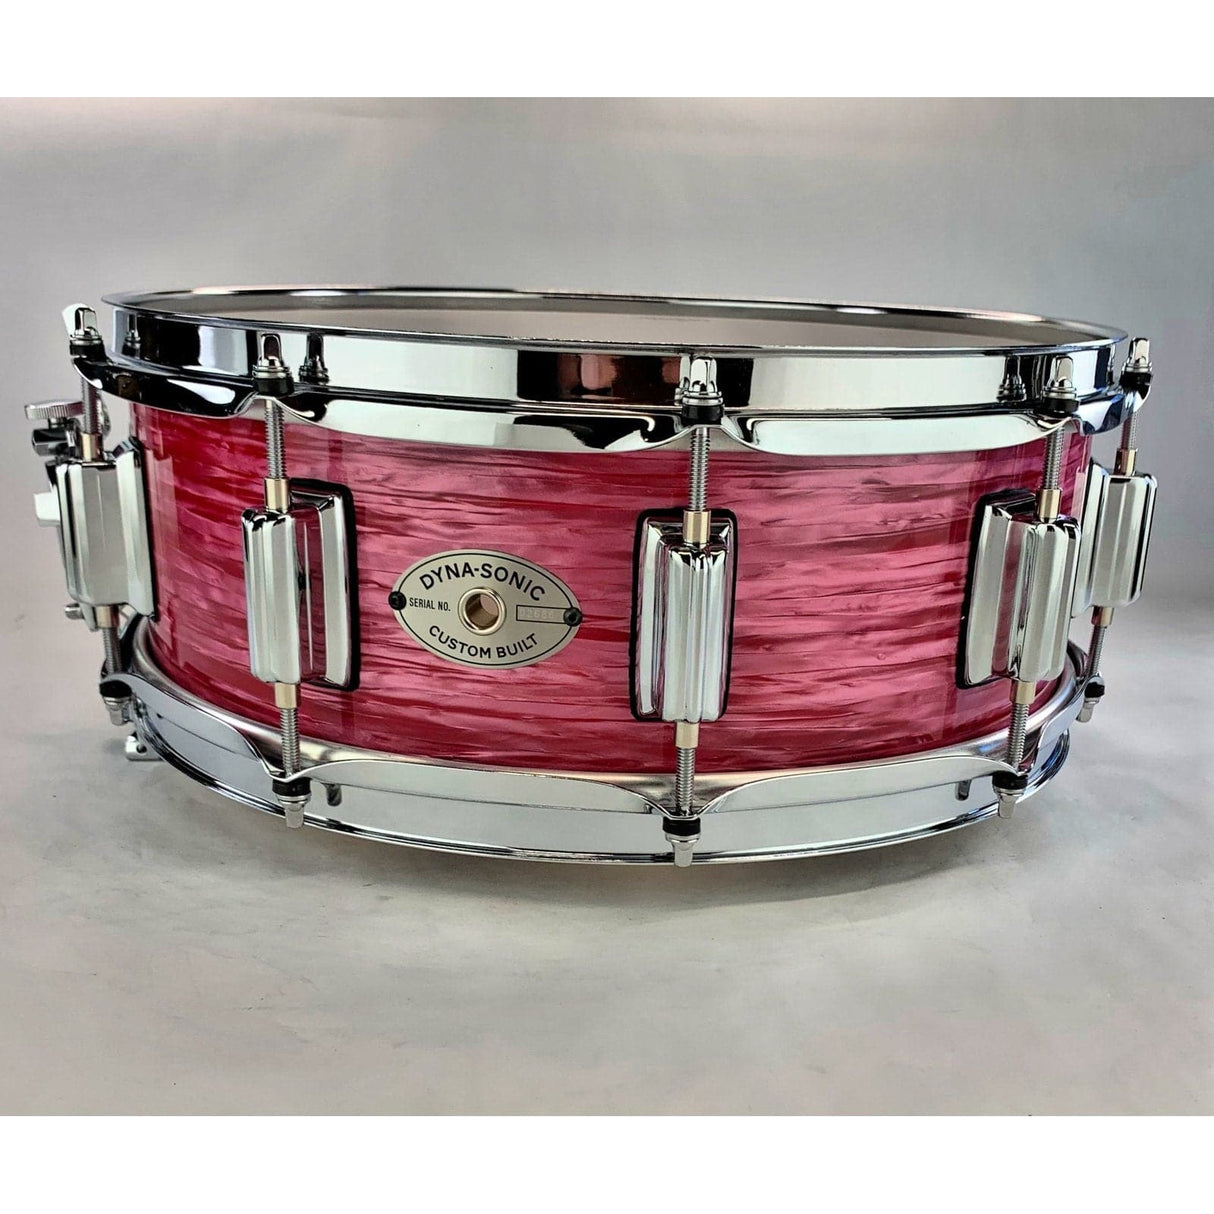 Rogers Dyna-sonic Wood Shell Snare Drum 14x5 Red Ripple Beavertail